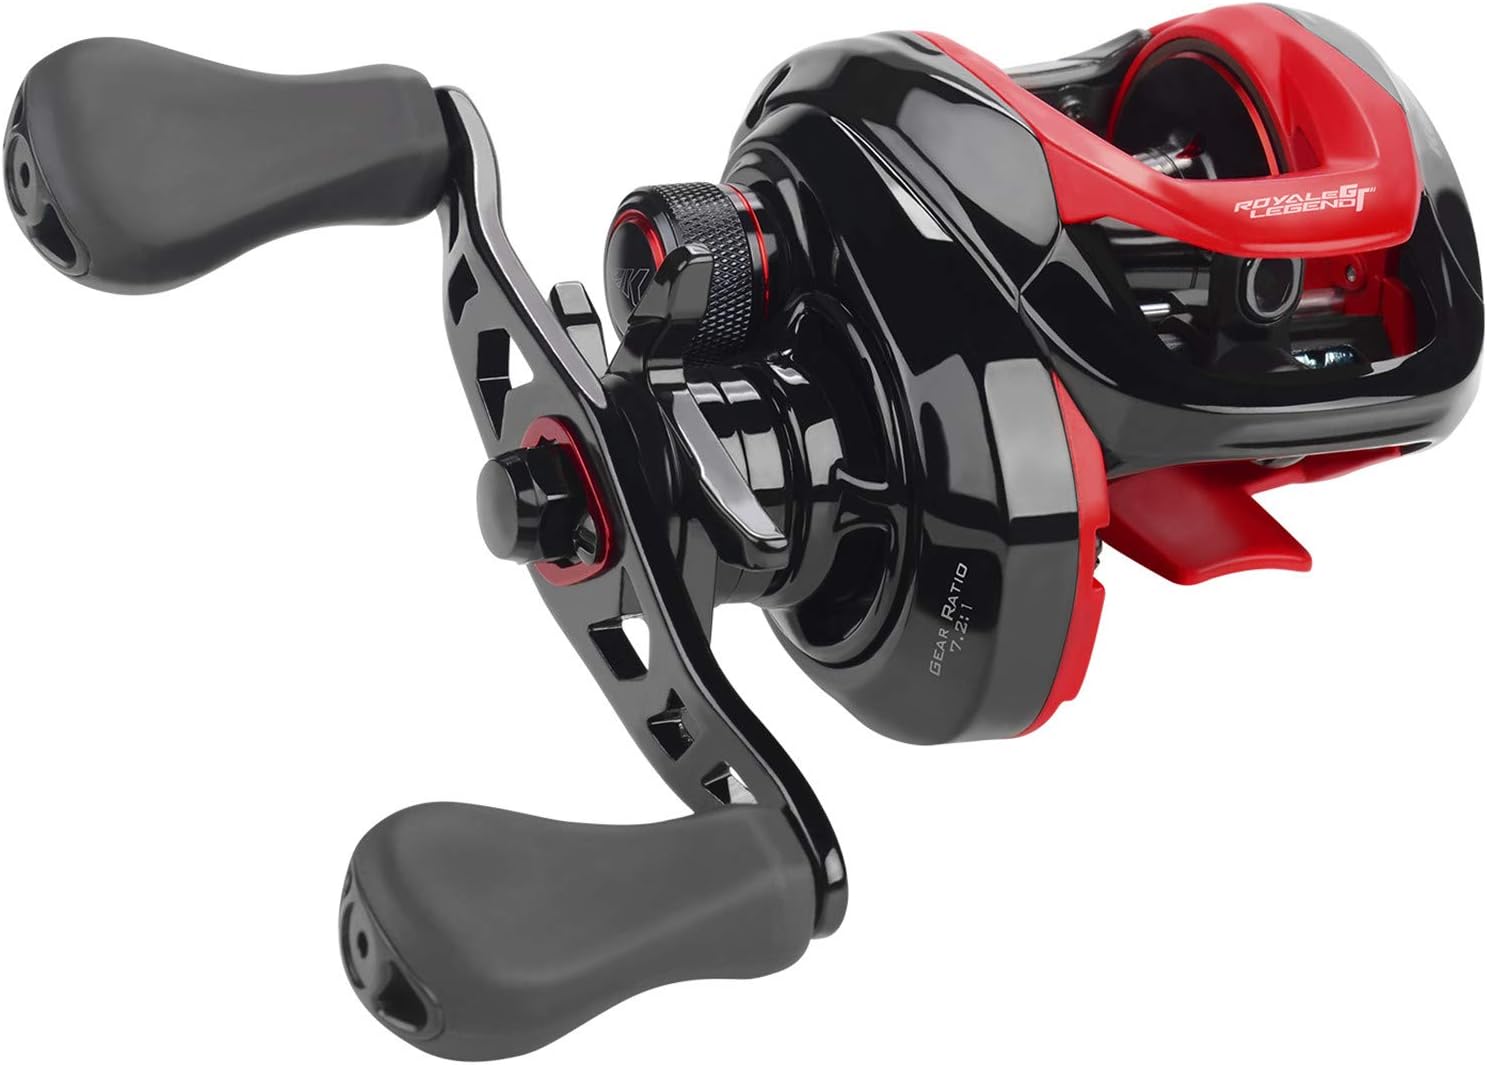 KastKing Royale Legend II Baitcasting Reels, New Compact Design Baitcaster Fishing Reel, 17.64LB Carbon Fiber Drag, Cross-Fire 8 Magnet Braking System, Available in 5.4:1 and 7.2:1